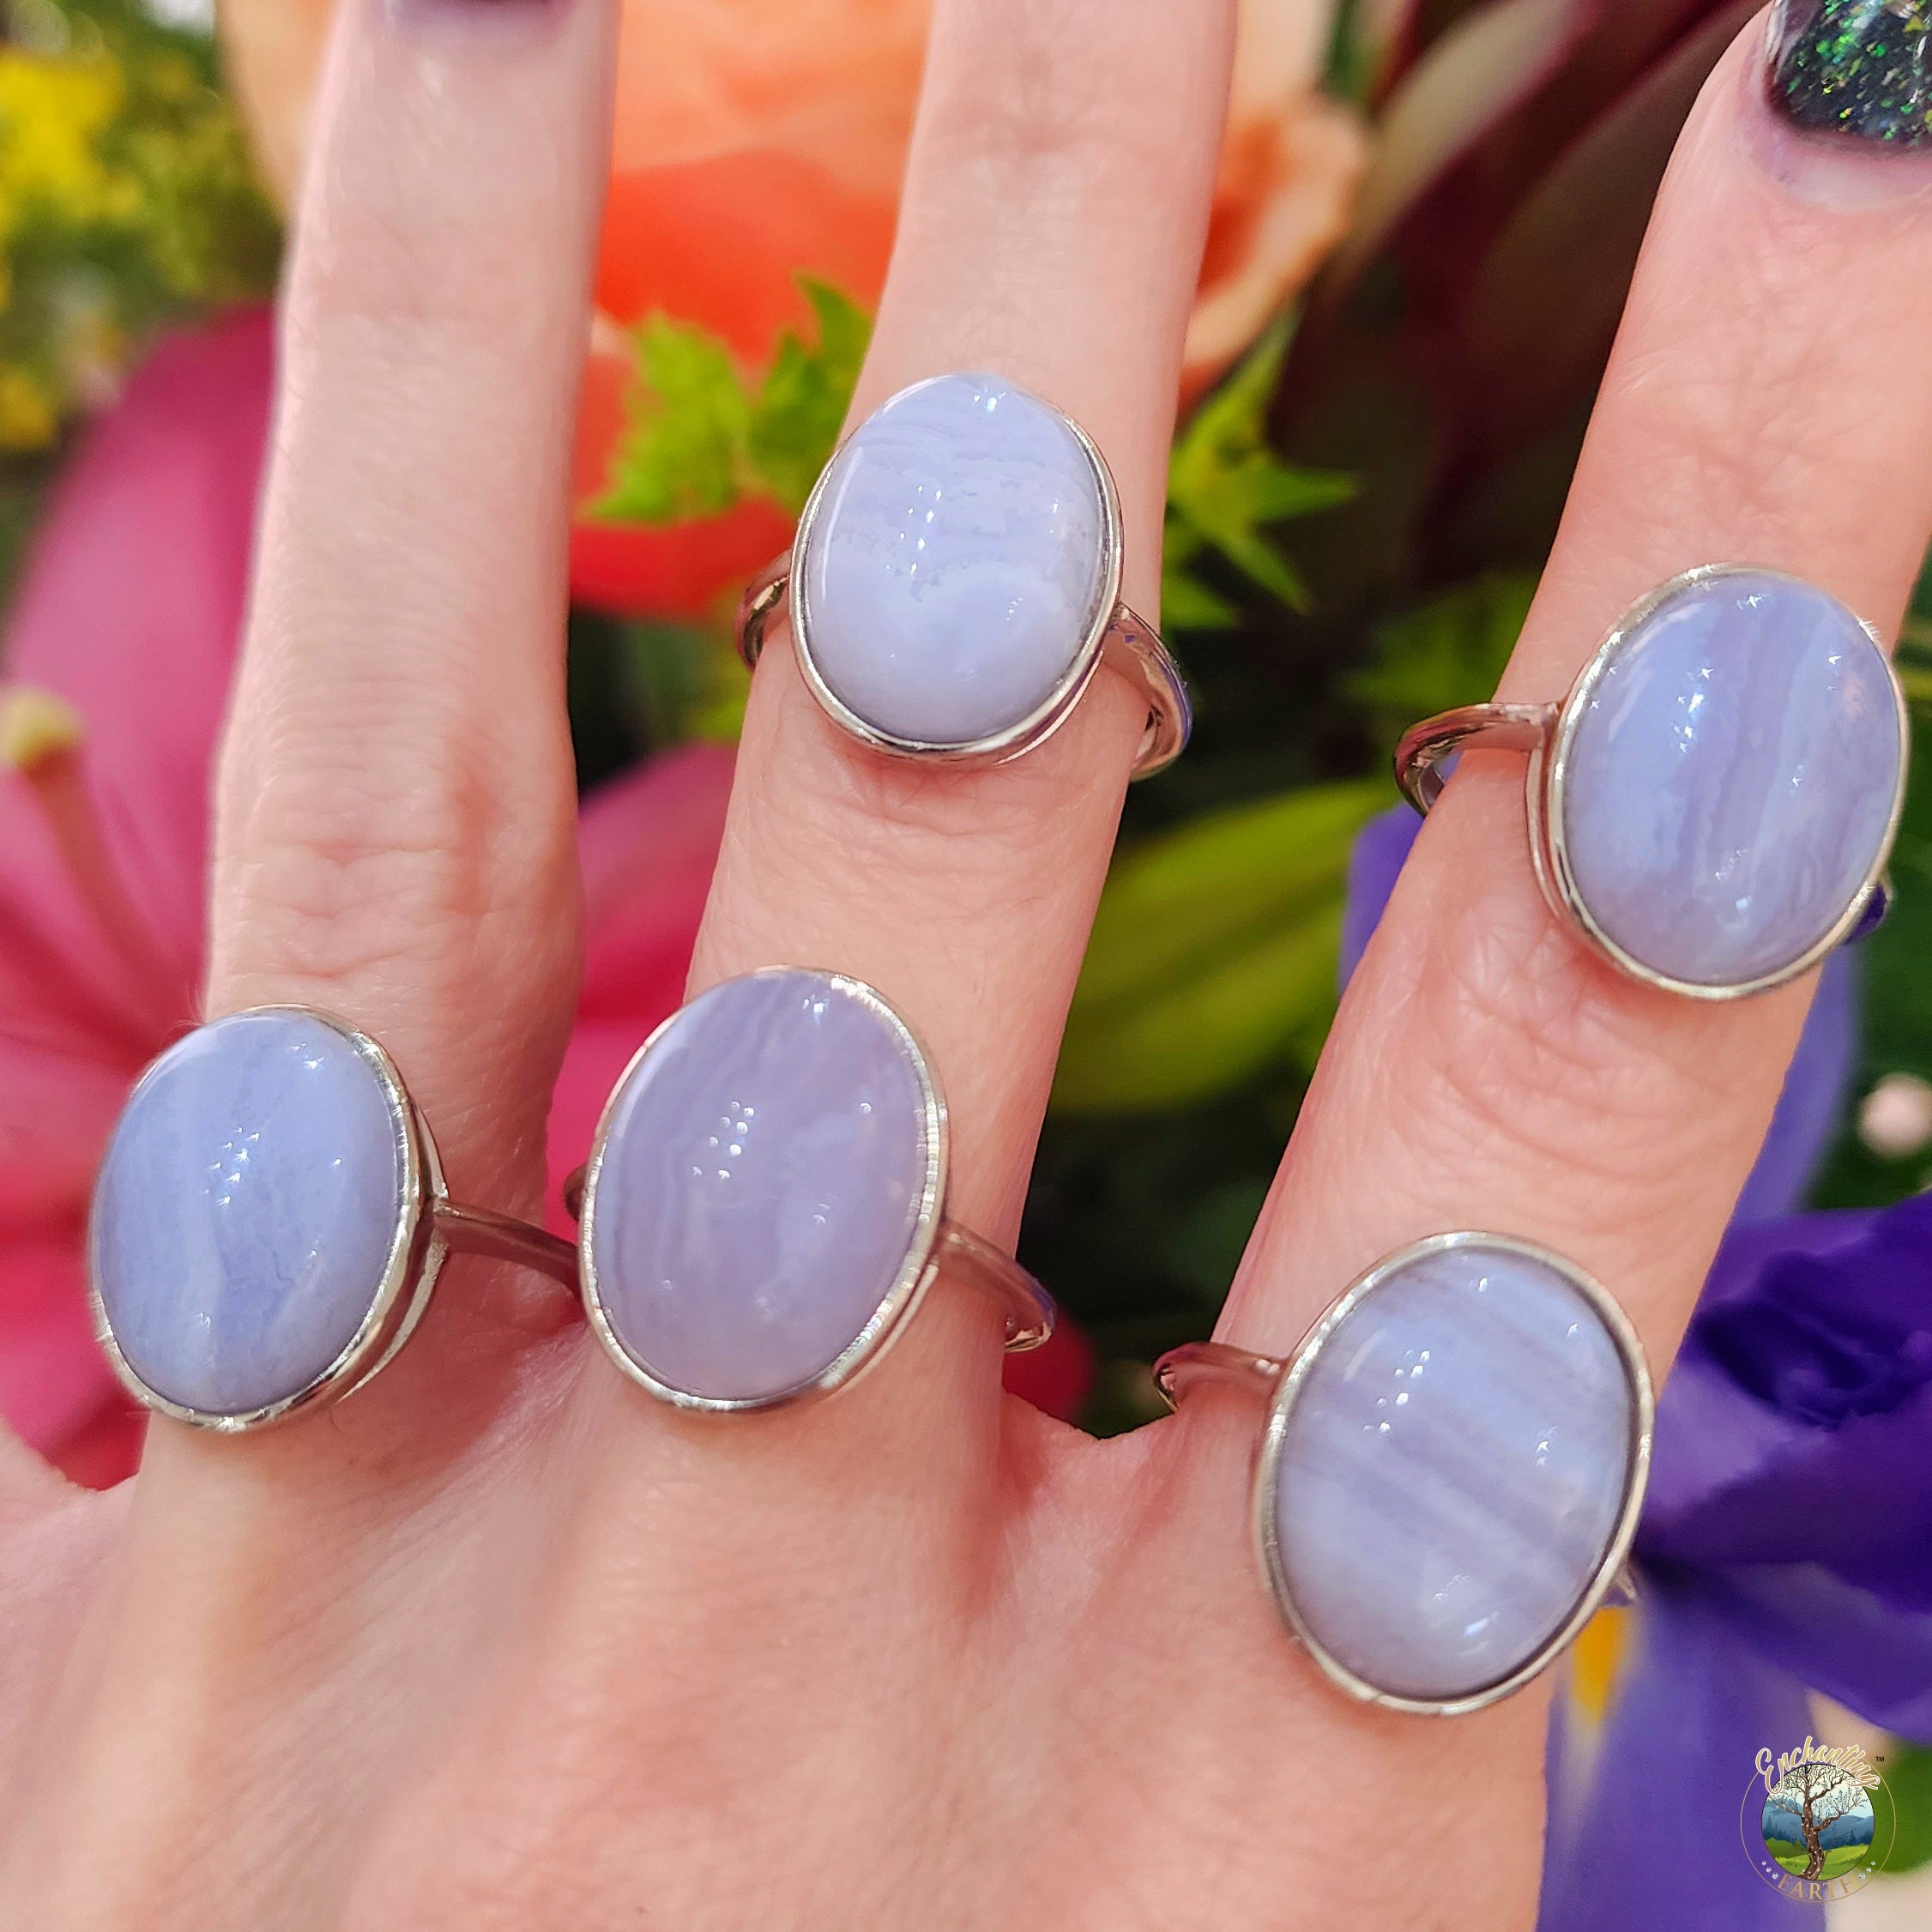 Blue Lace Agate Adjustable Ring .925 Silver for Soothing Emotions and Improving Communication